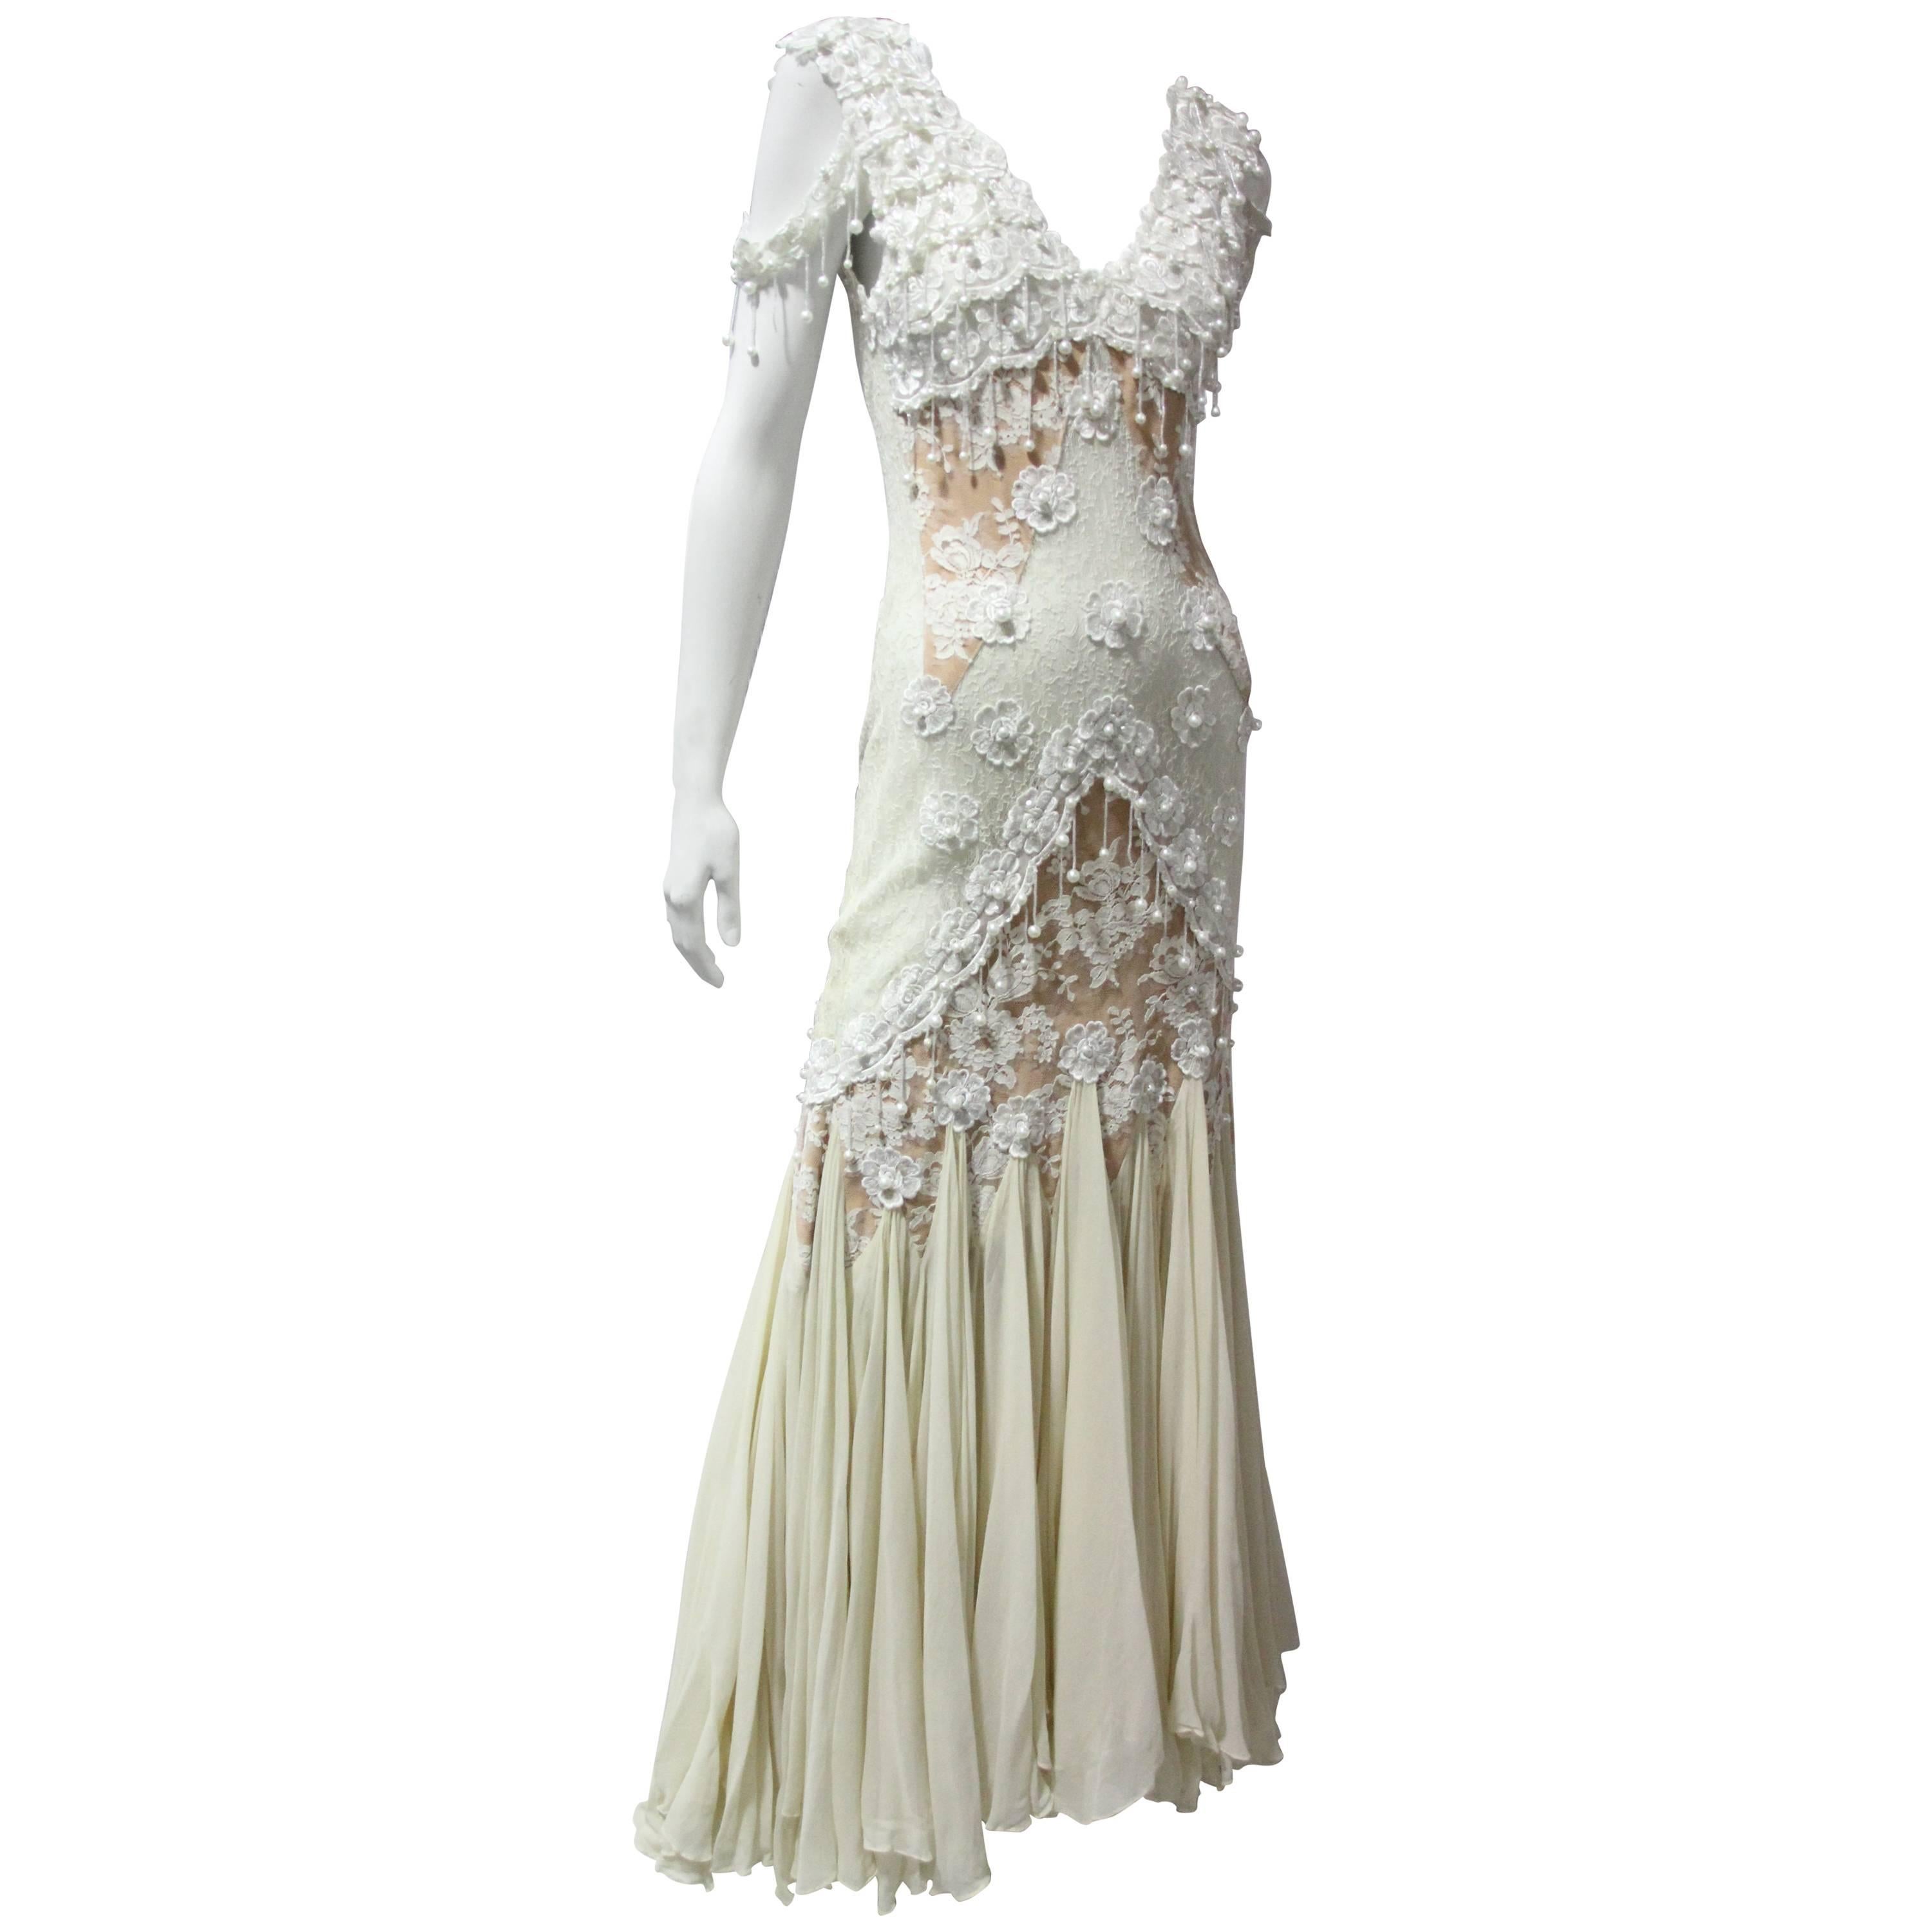 Antique White / Nude Lace Slip Dress with Pearls and Chiffon Mermaid Hem